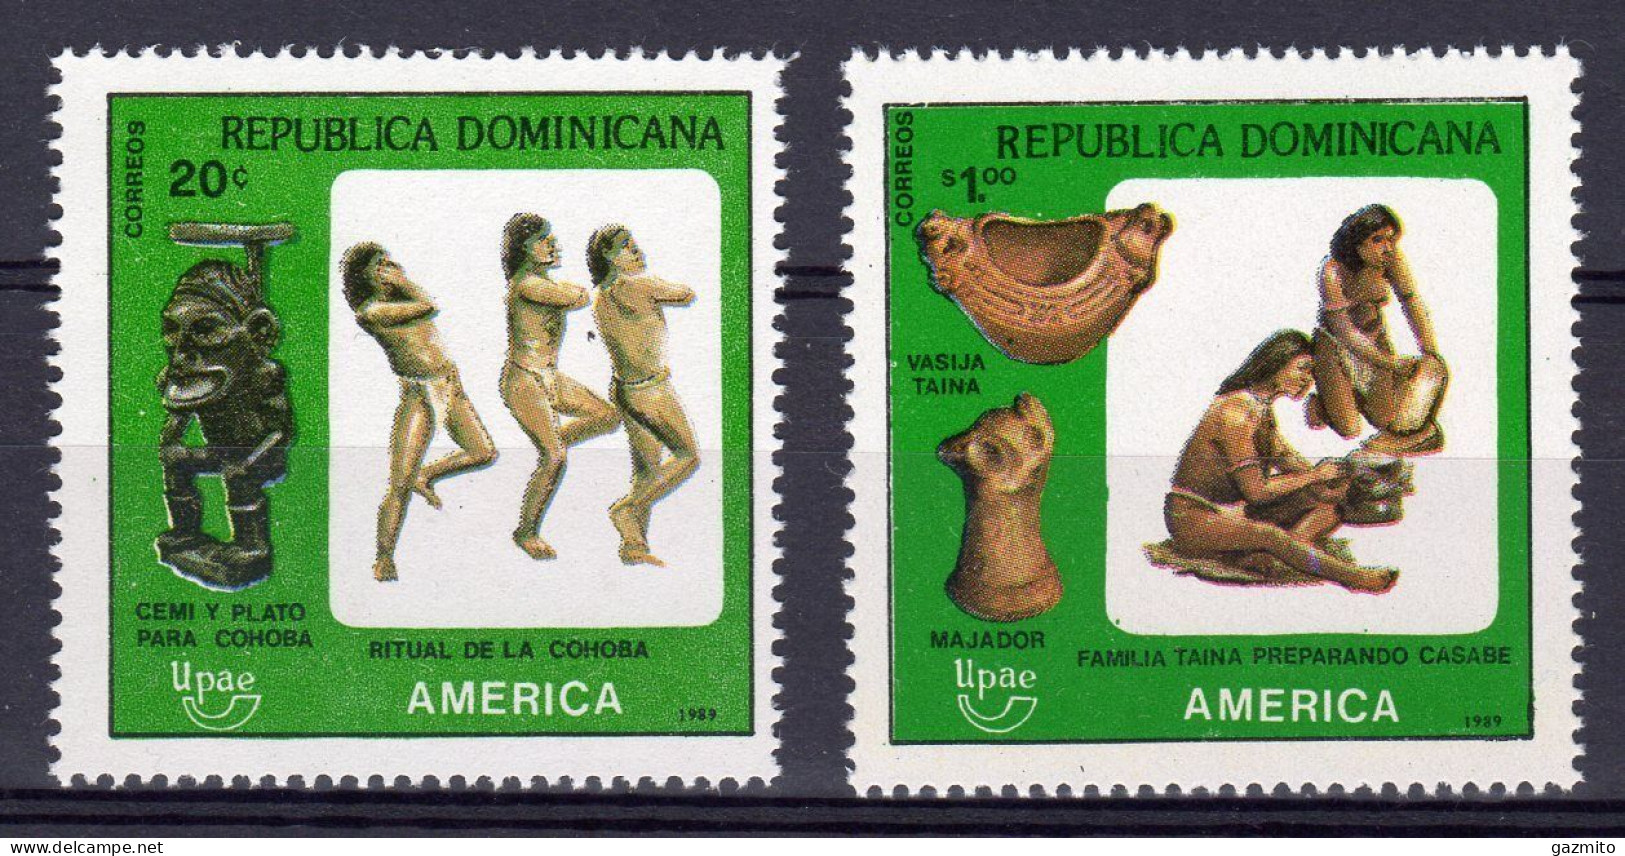 Dominicana 1989, UPAEP, Pre Colombian Artfacts, 2val - American Indians